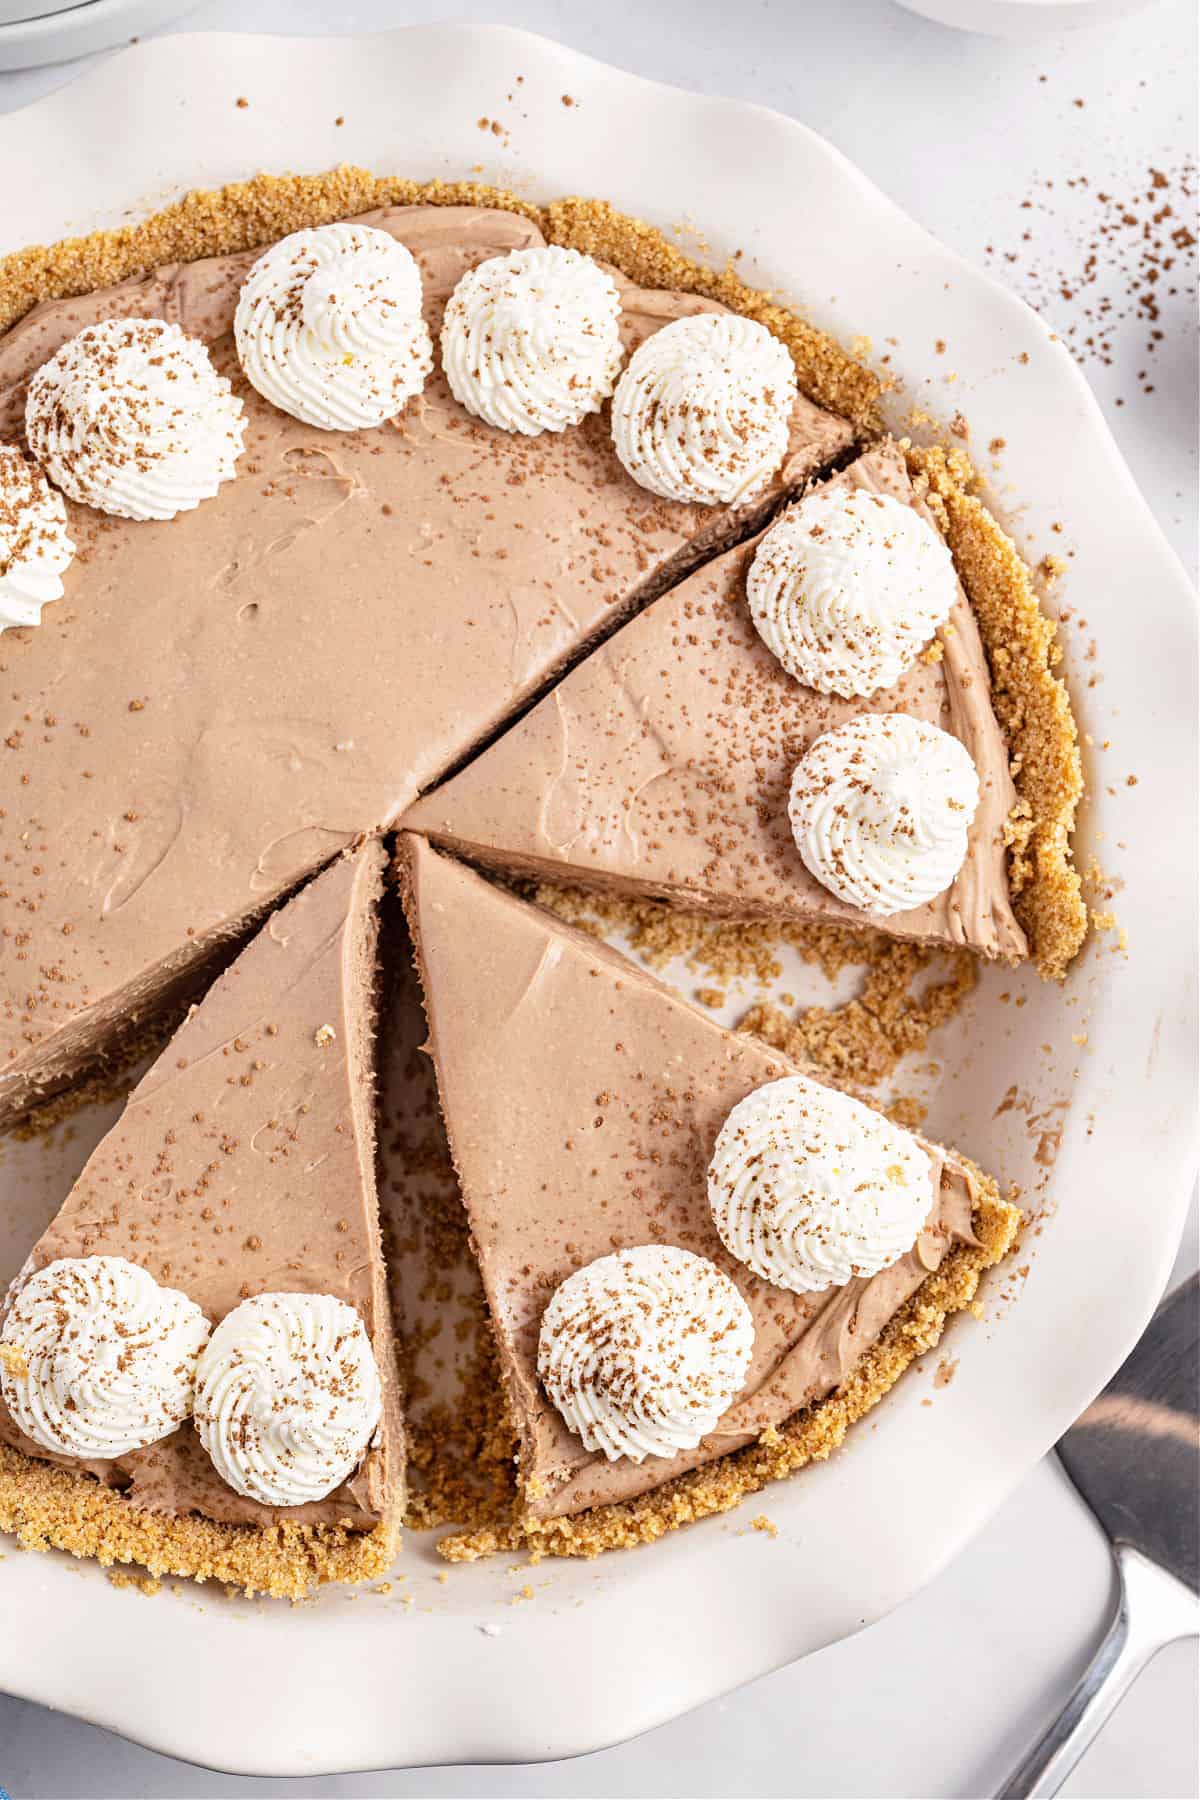 Nutella cheesecake in a white pie plate with slices cut.